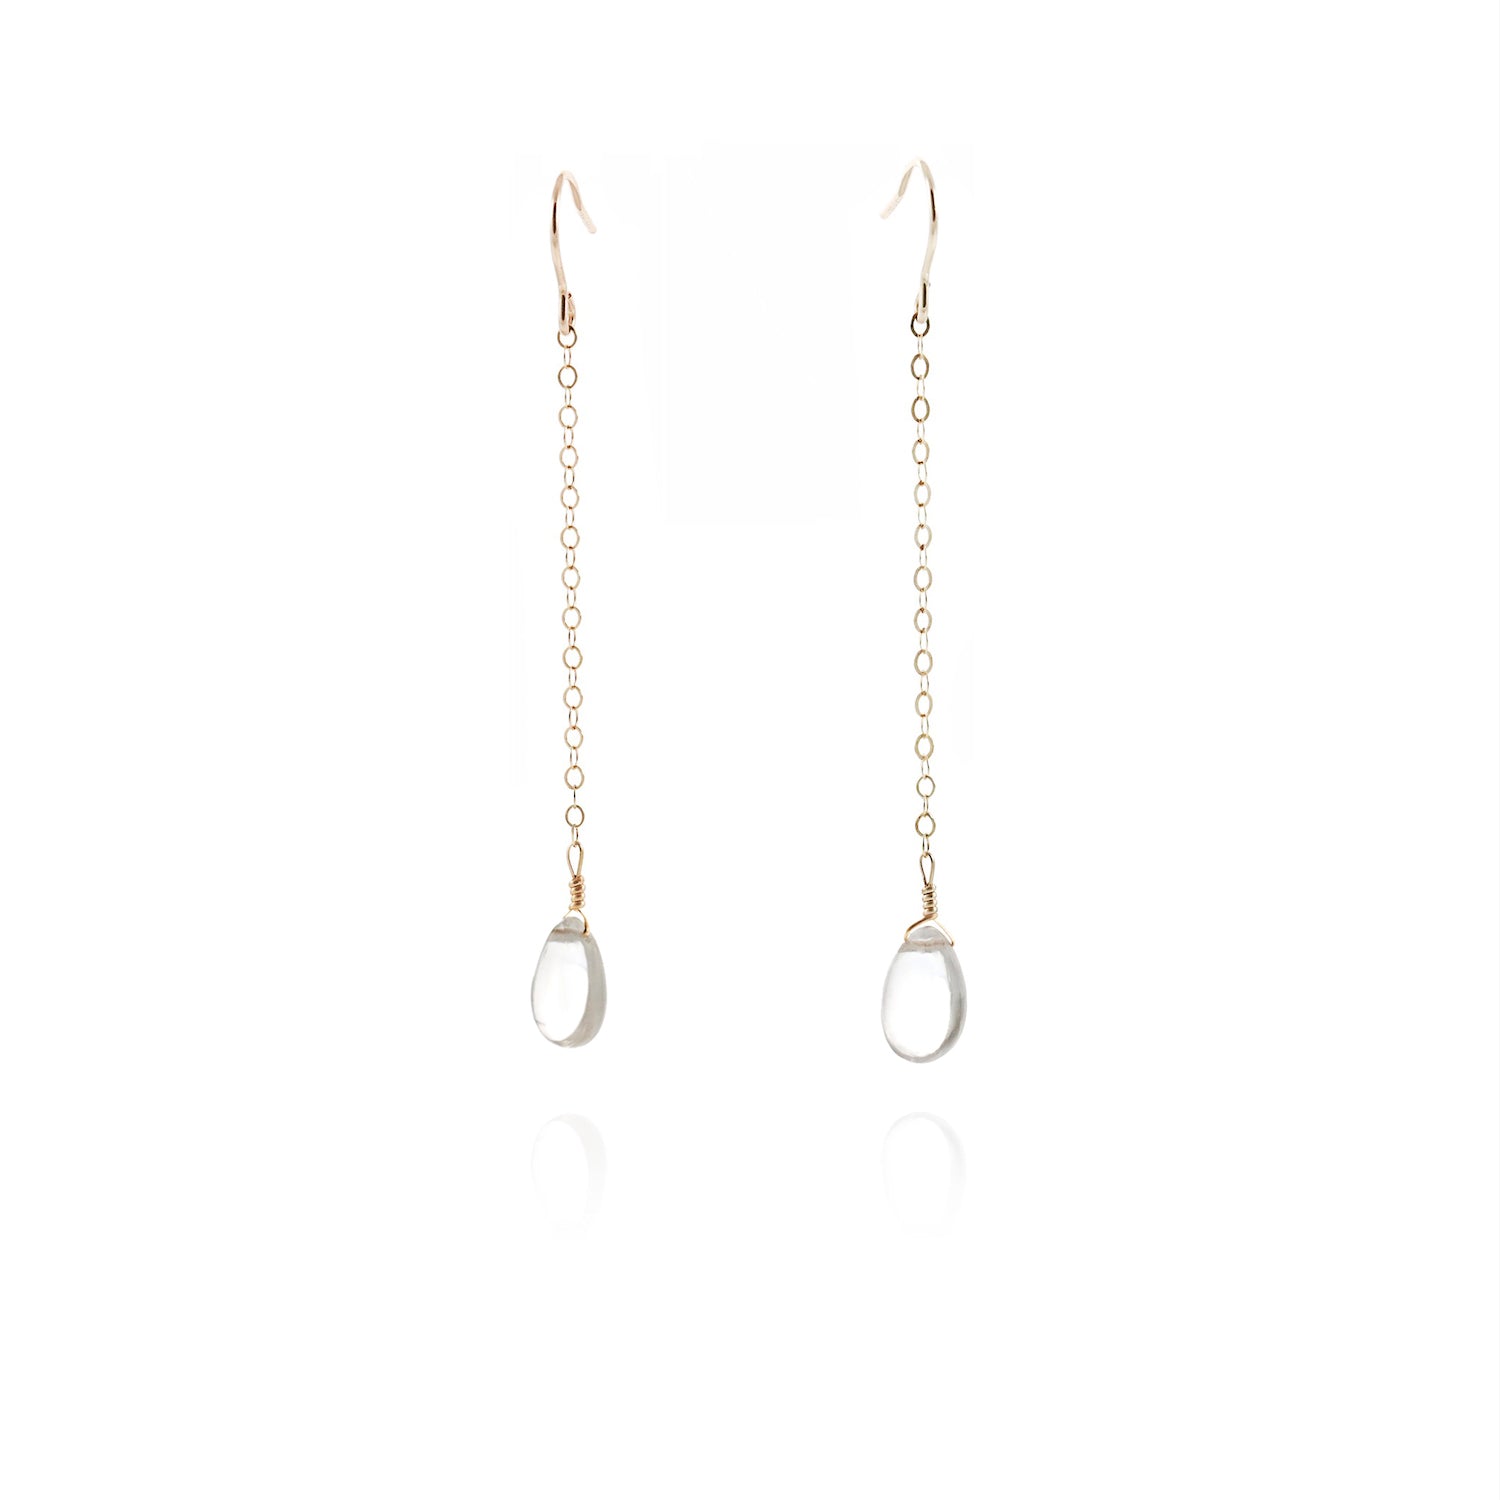 gold drop earrings with clear quartz gems